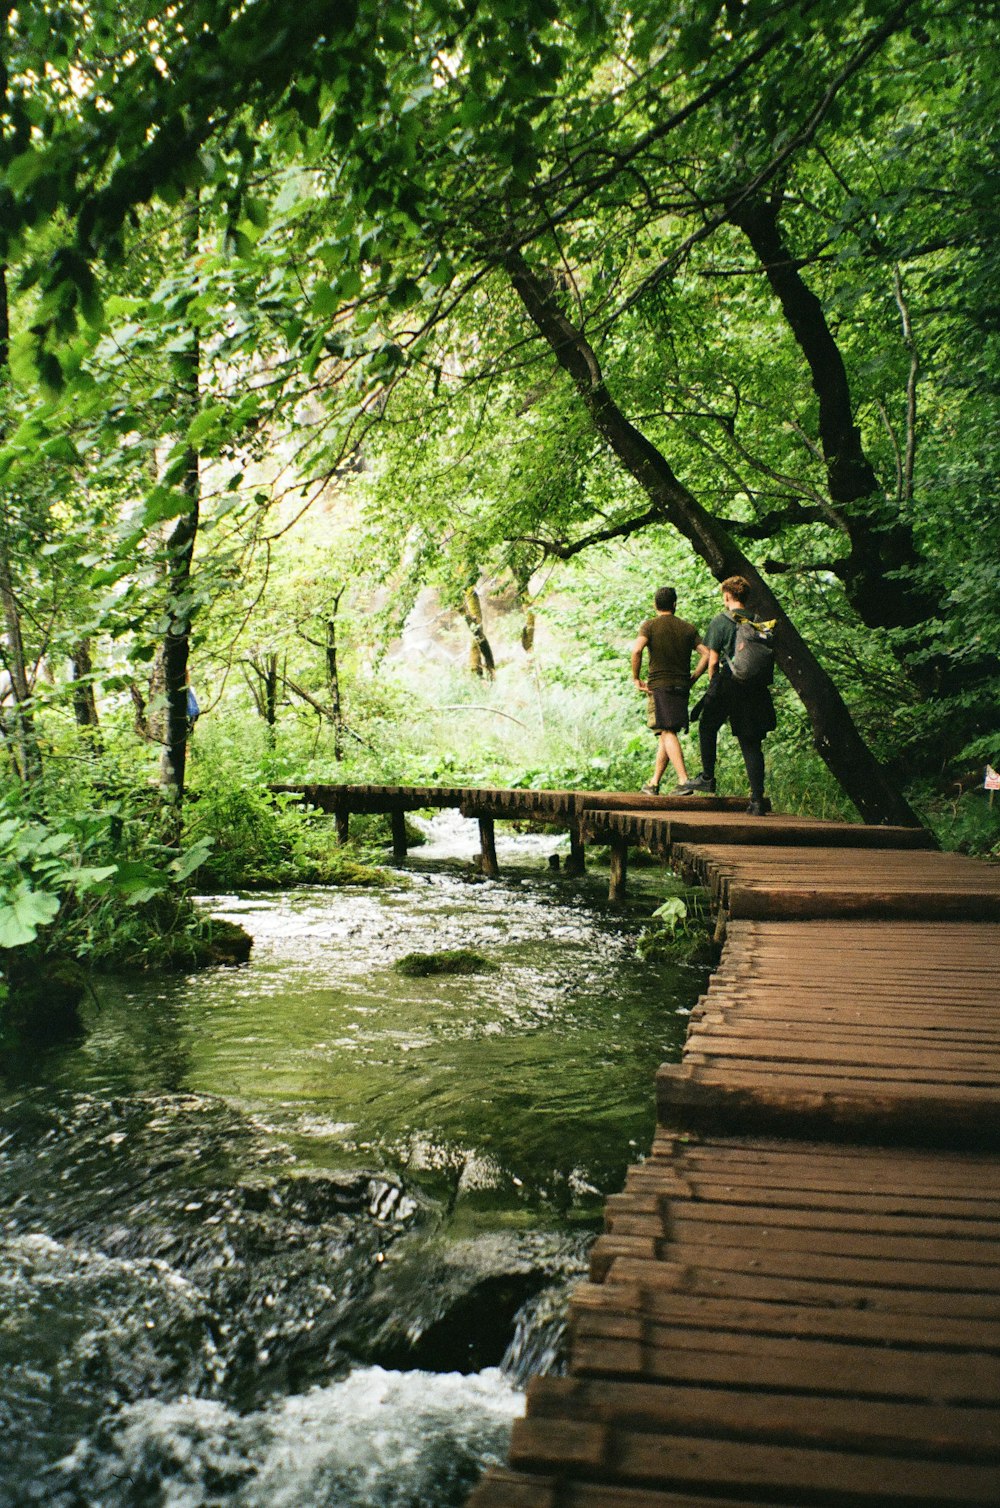 a group of people walking on a wooden bridge over a river